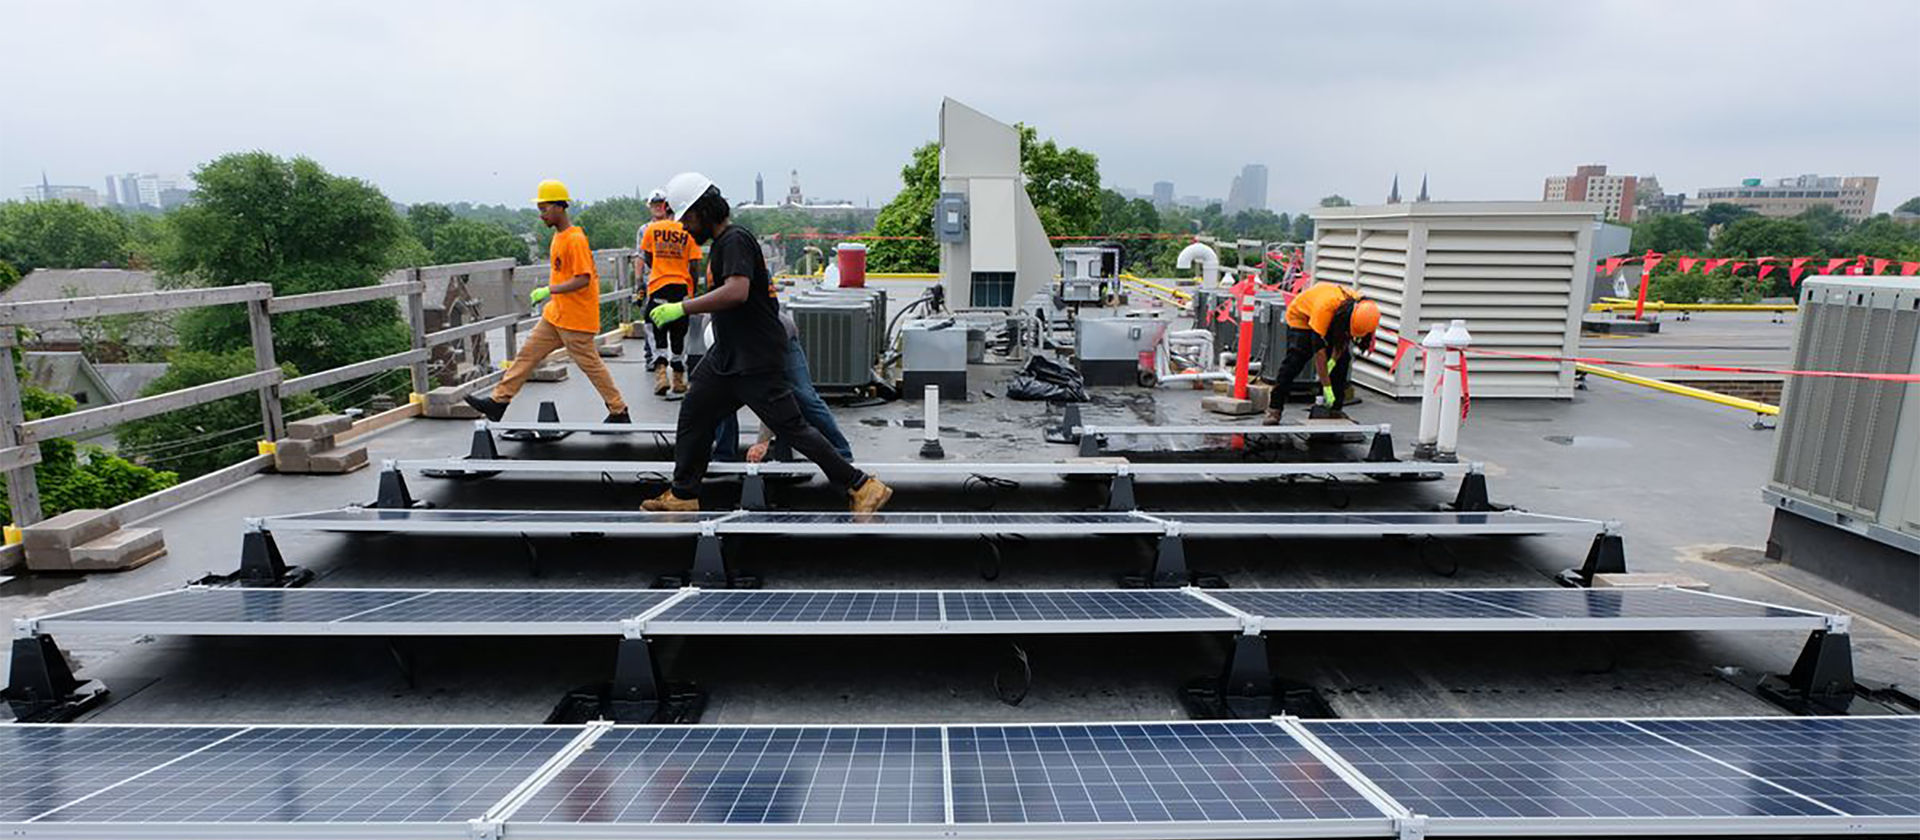 Group of people on roof installing solar panels